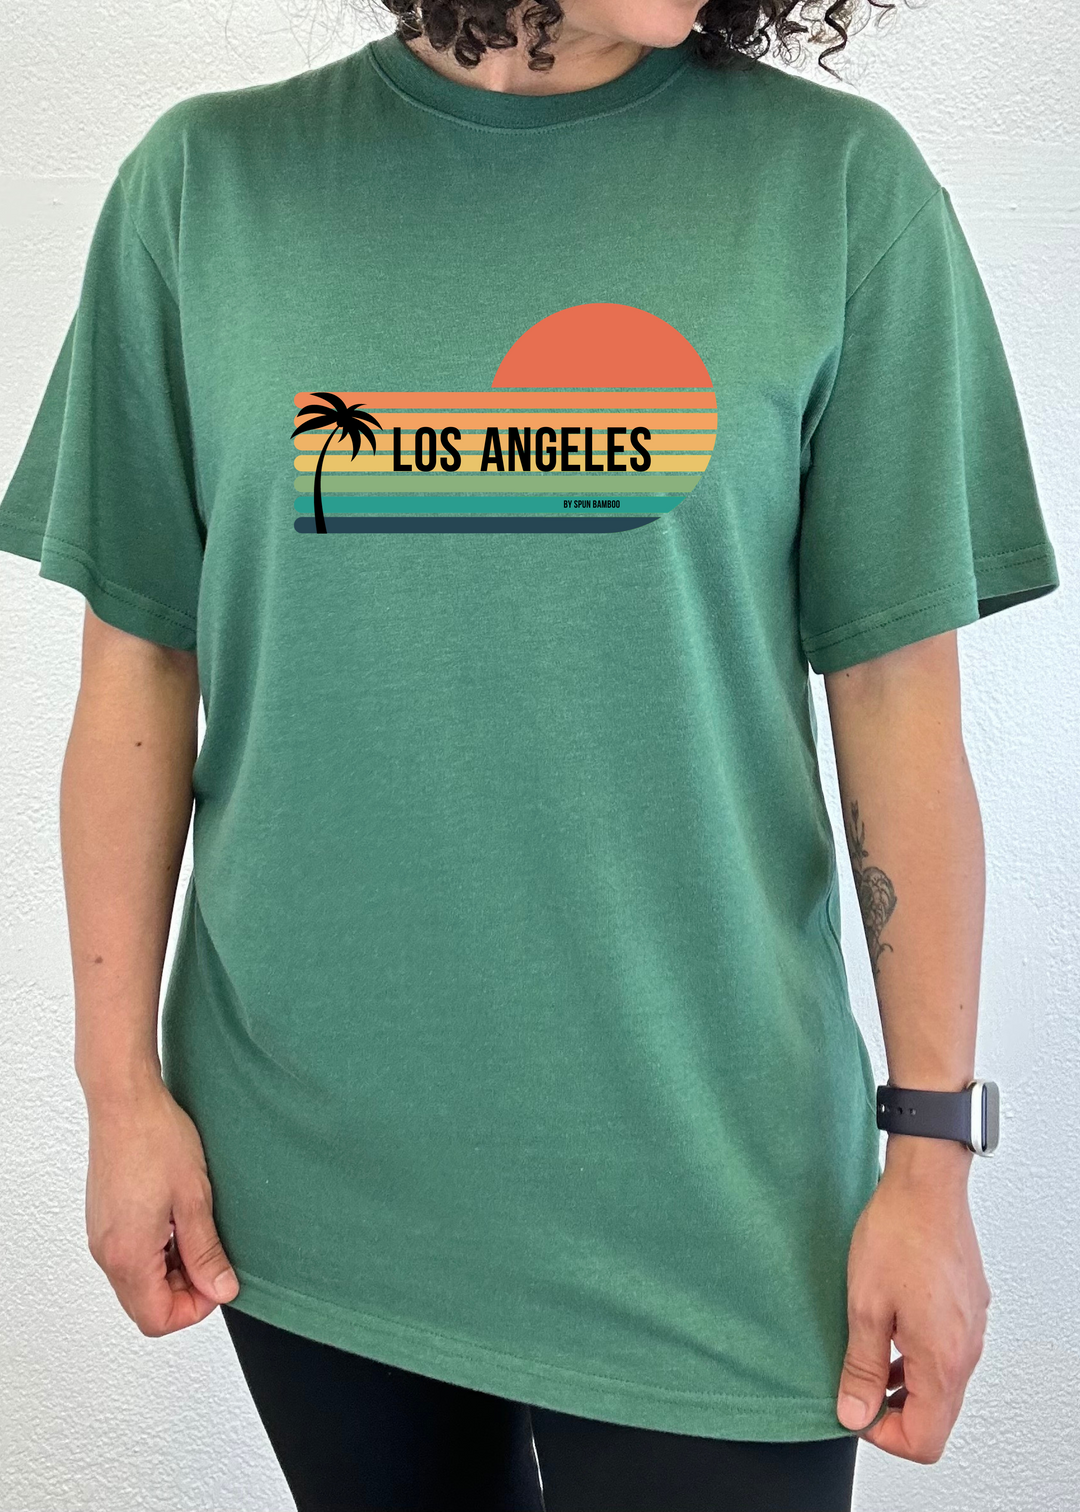 Los Angeles Spun Bamboo Unisex Graphic Bamboo T-Shirt teal